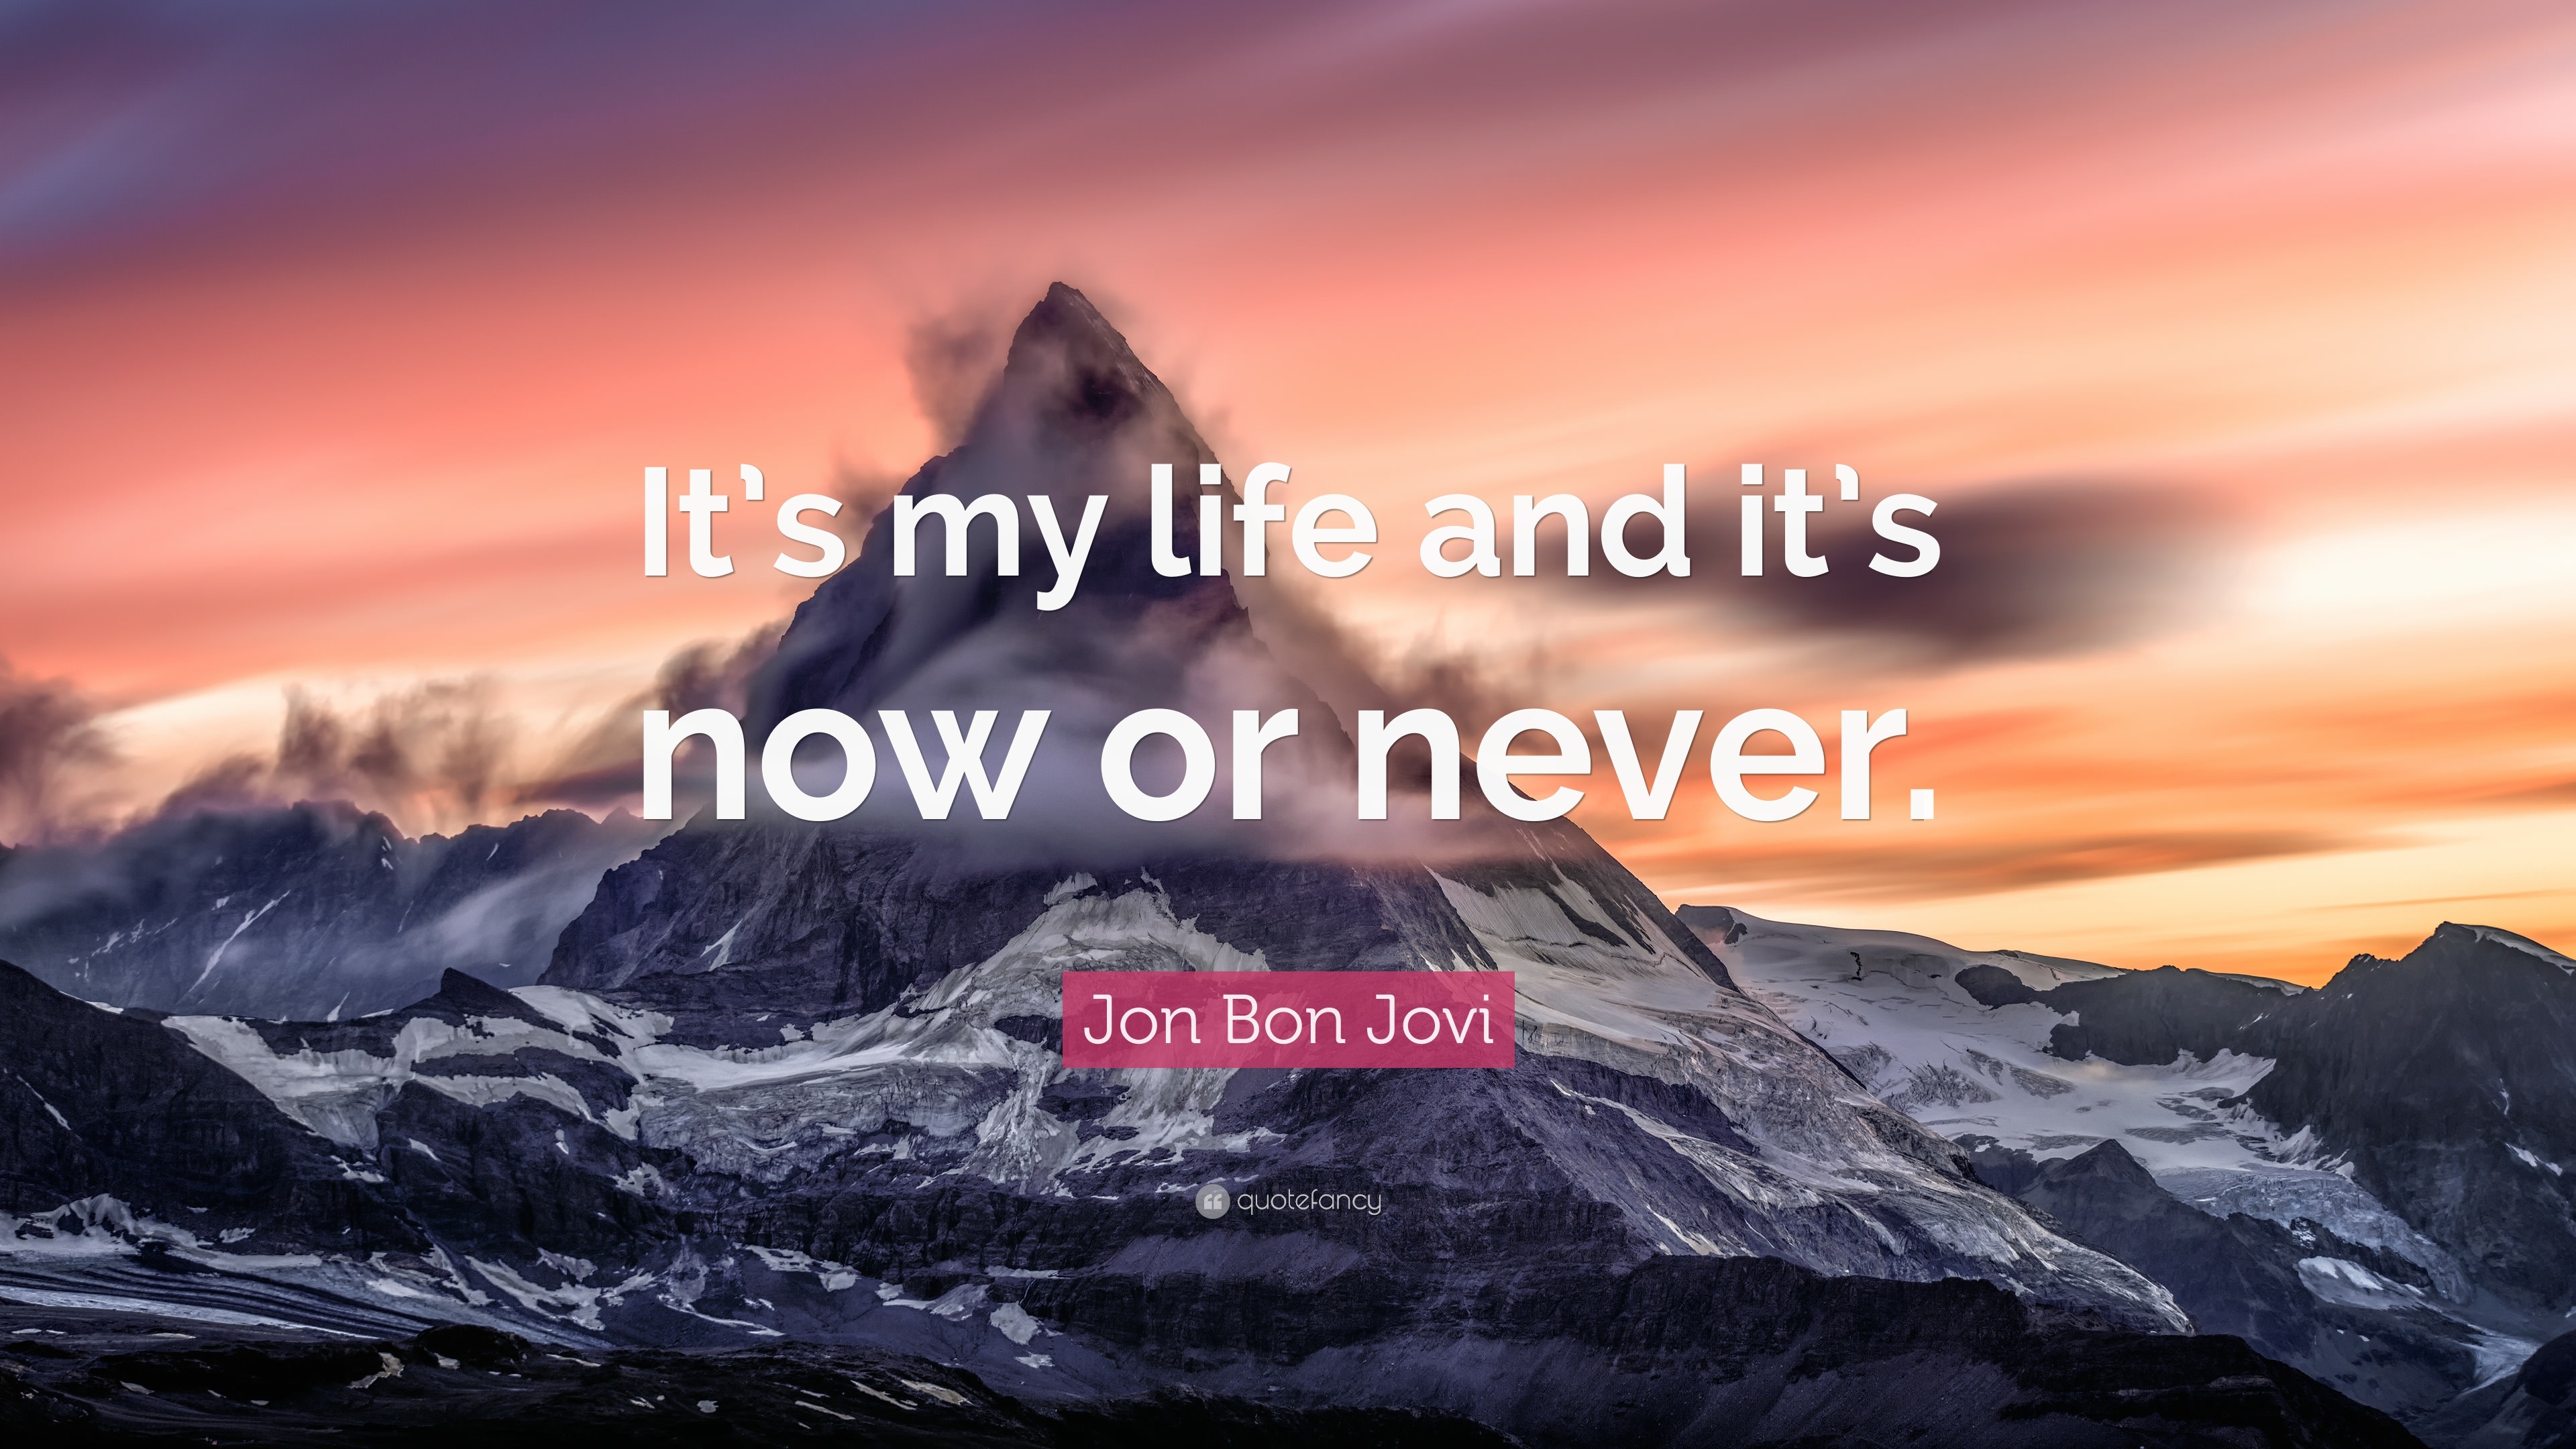 Jon Bon Jovi Quote: “It's my life and it's now or never.”